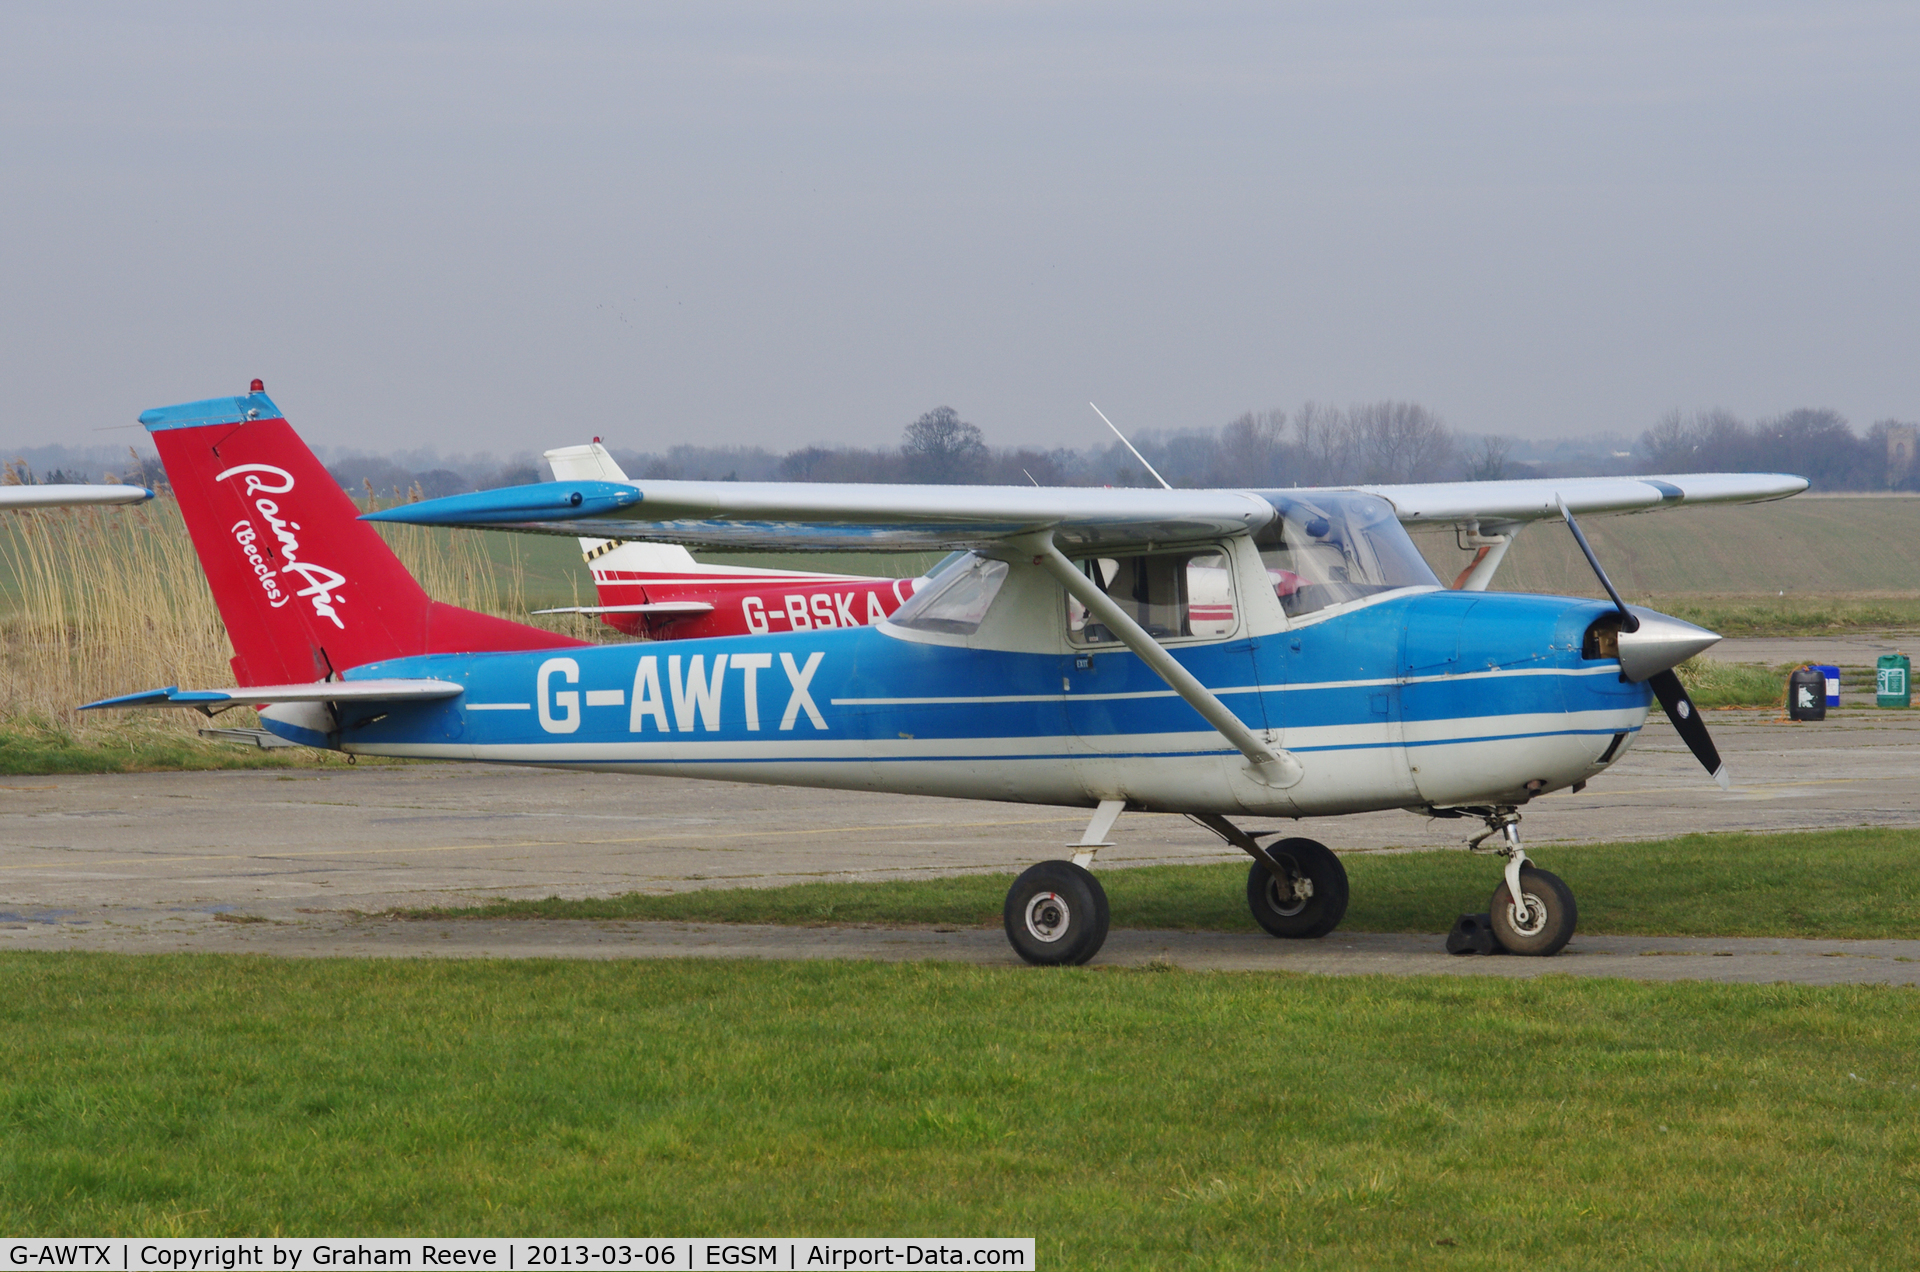 G-AWTX, 1968 Reims F150J C/N 0404, Paked at Beccles.